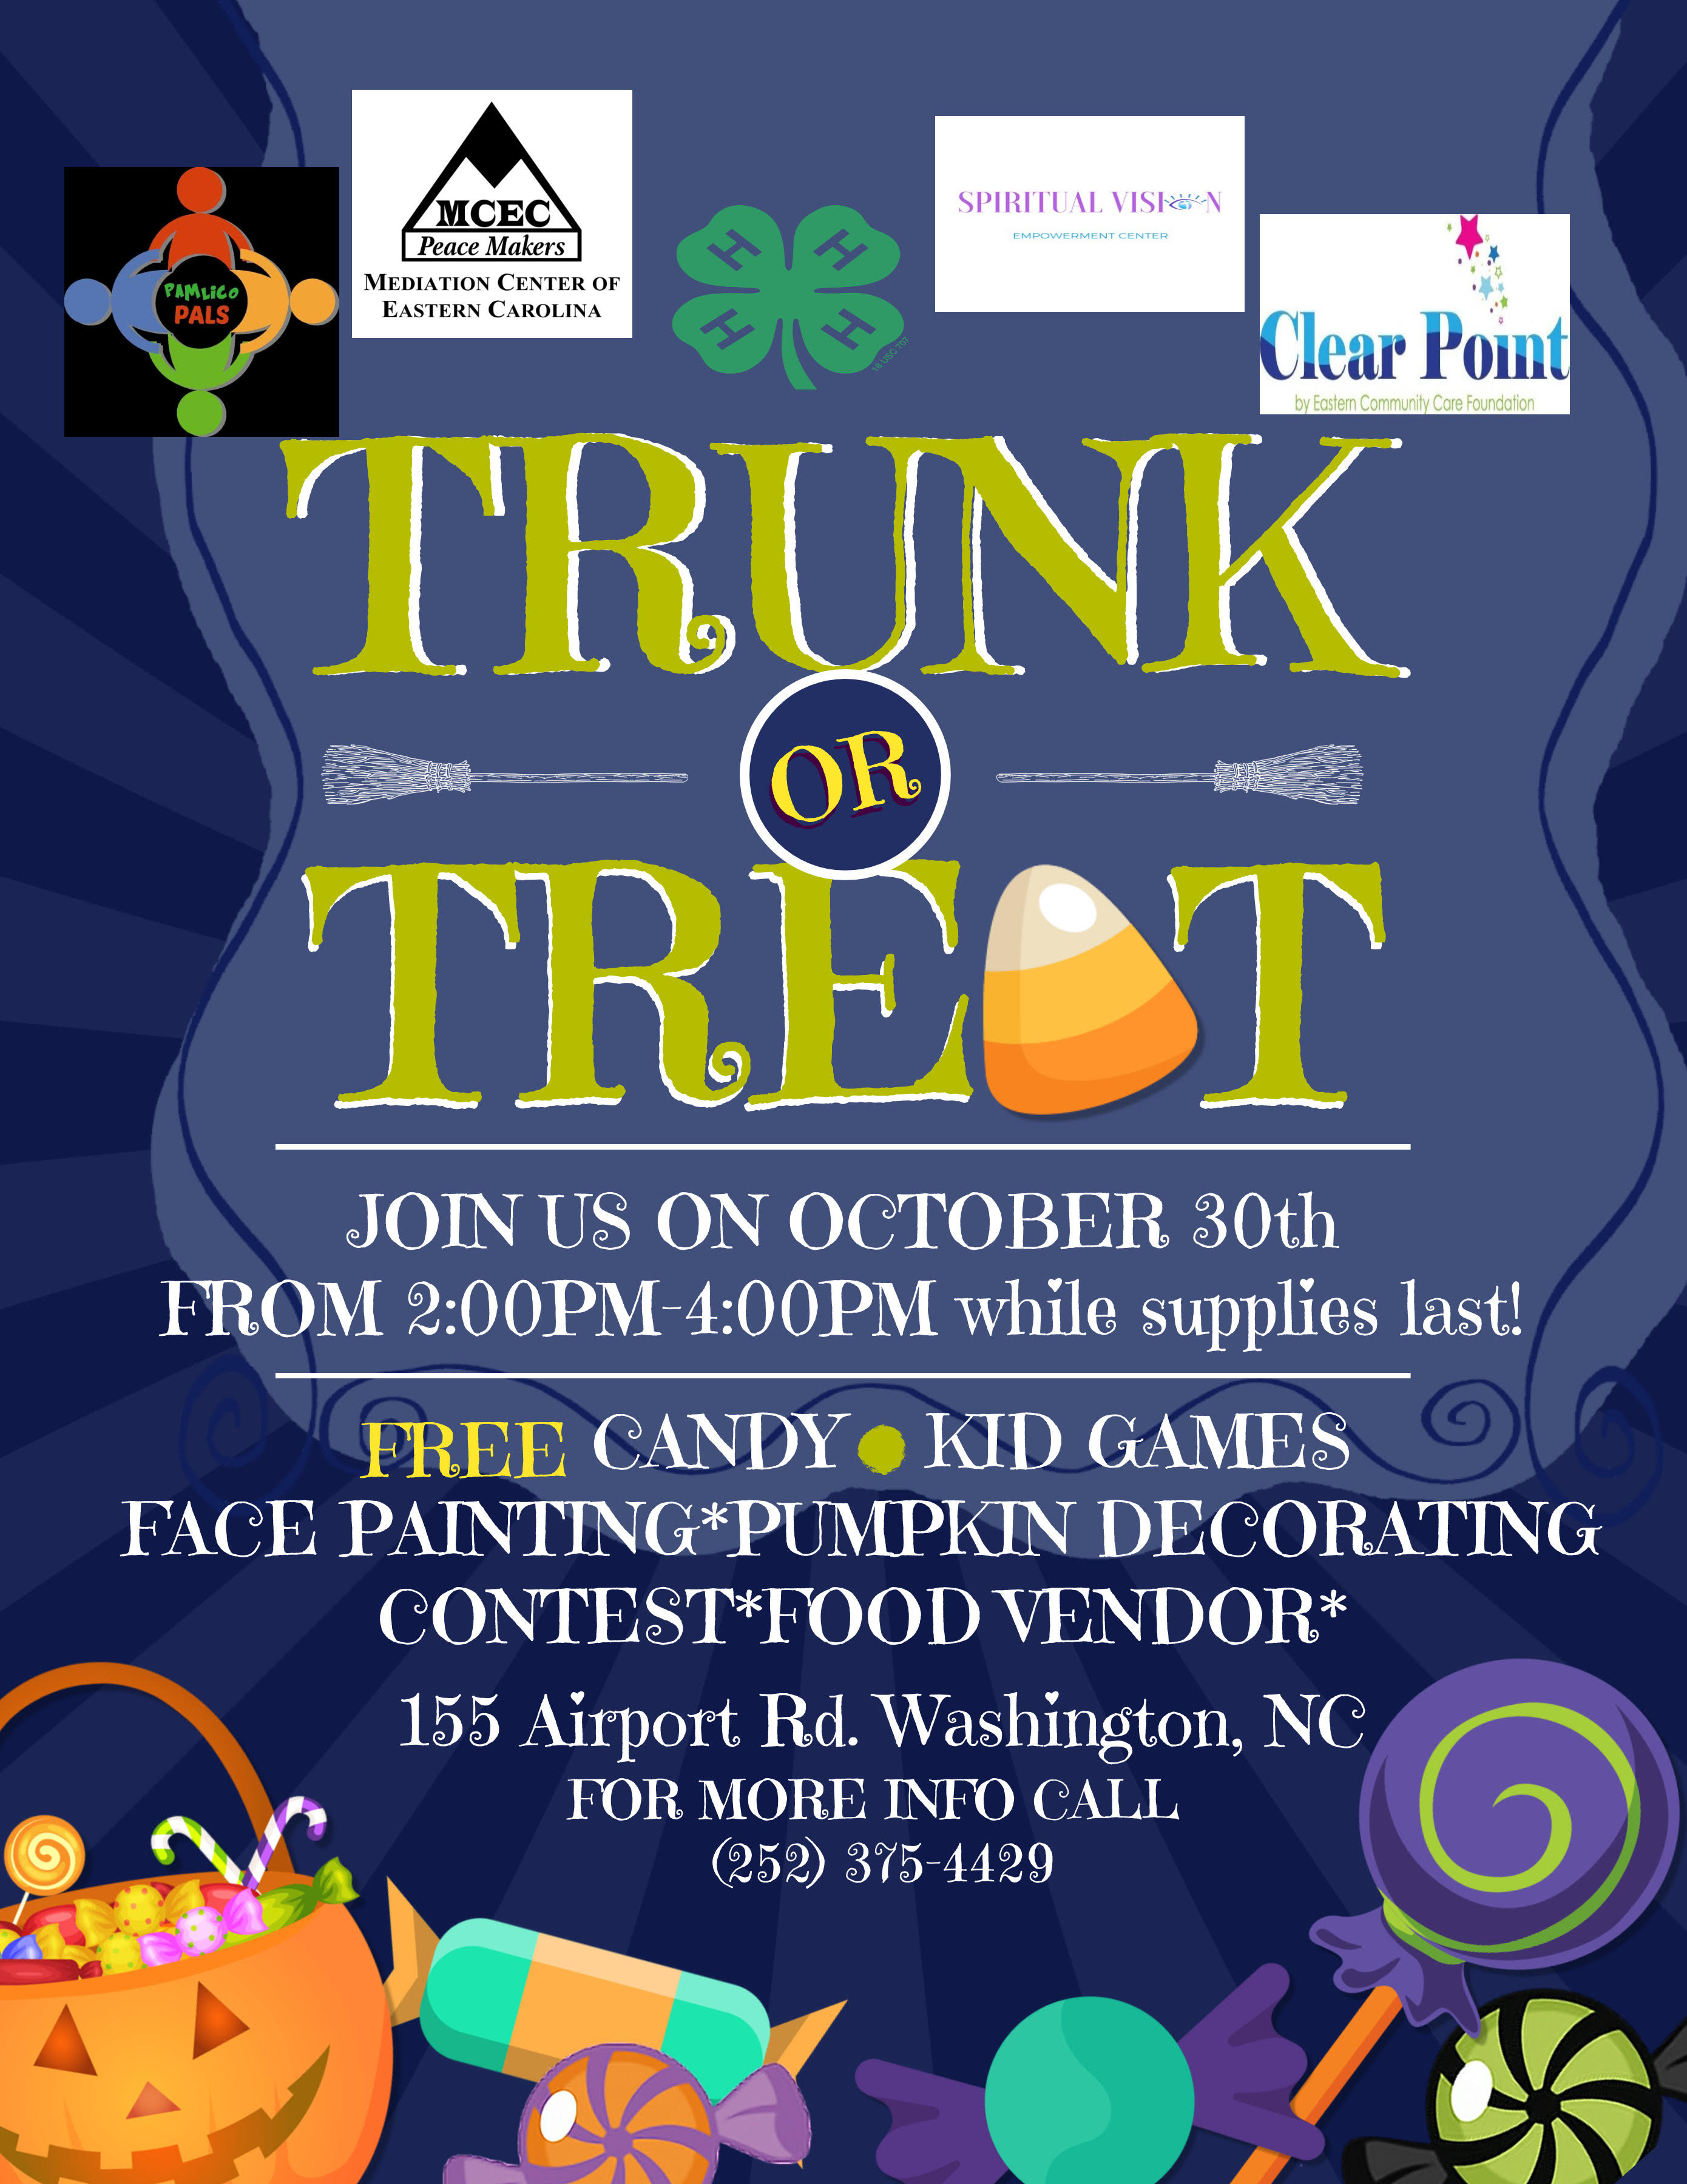 Trunk-or-treat. Join us on October 30th from 2-4 p.m. for a trunk or treat at 155 Airport Road in Washington